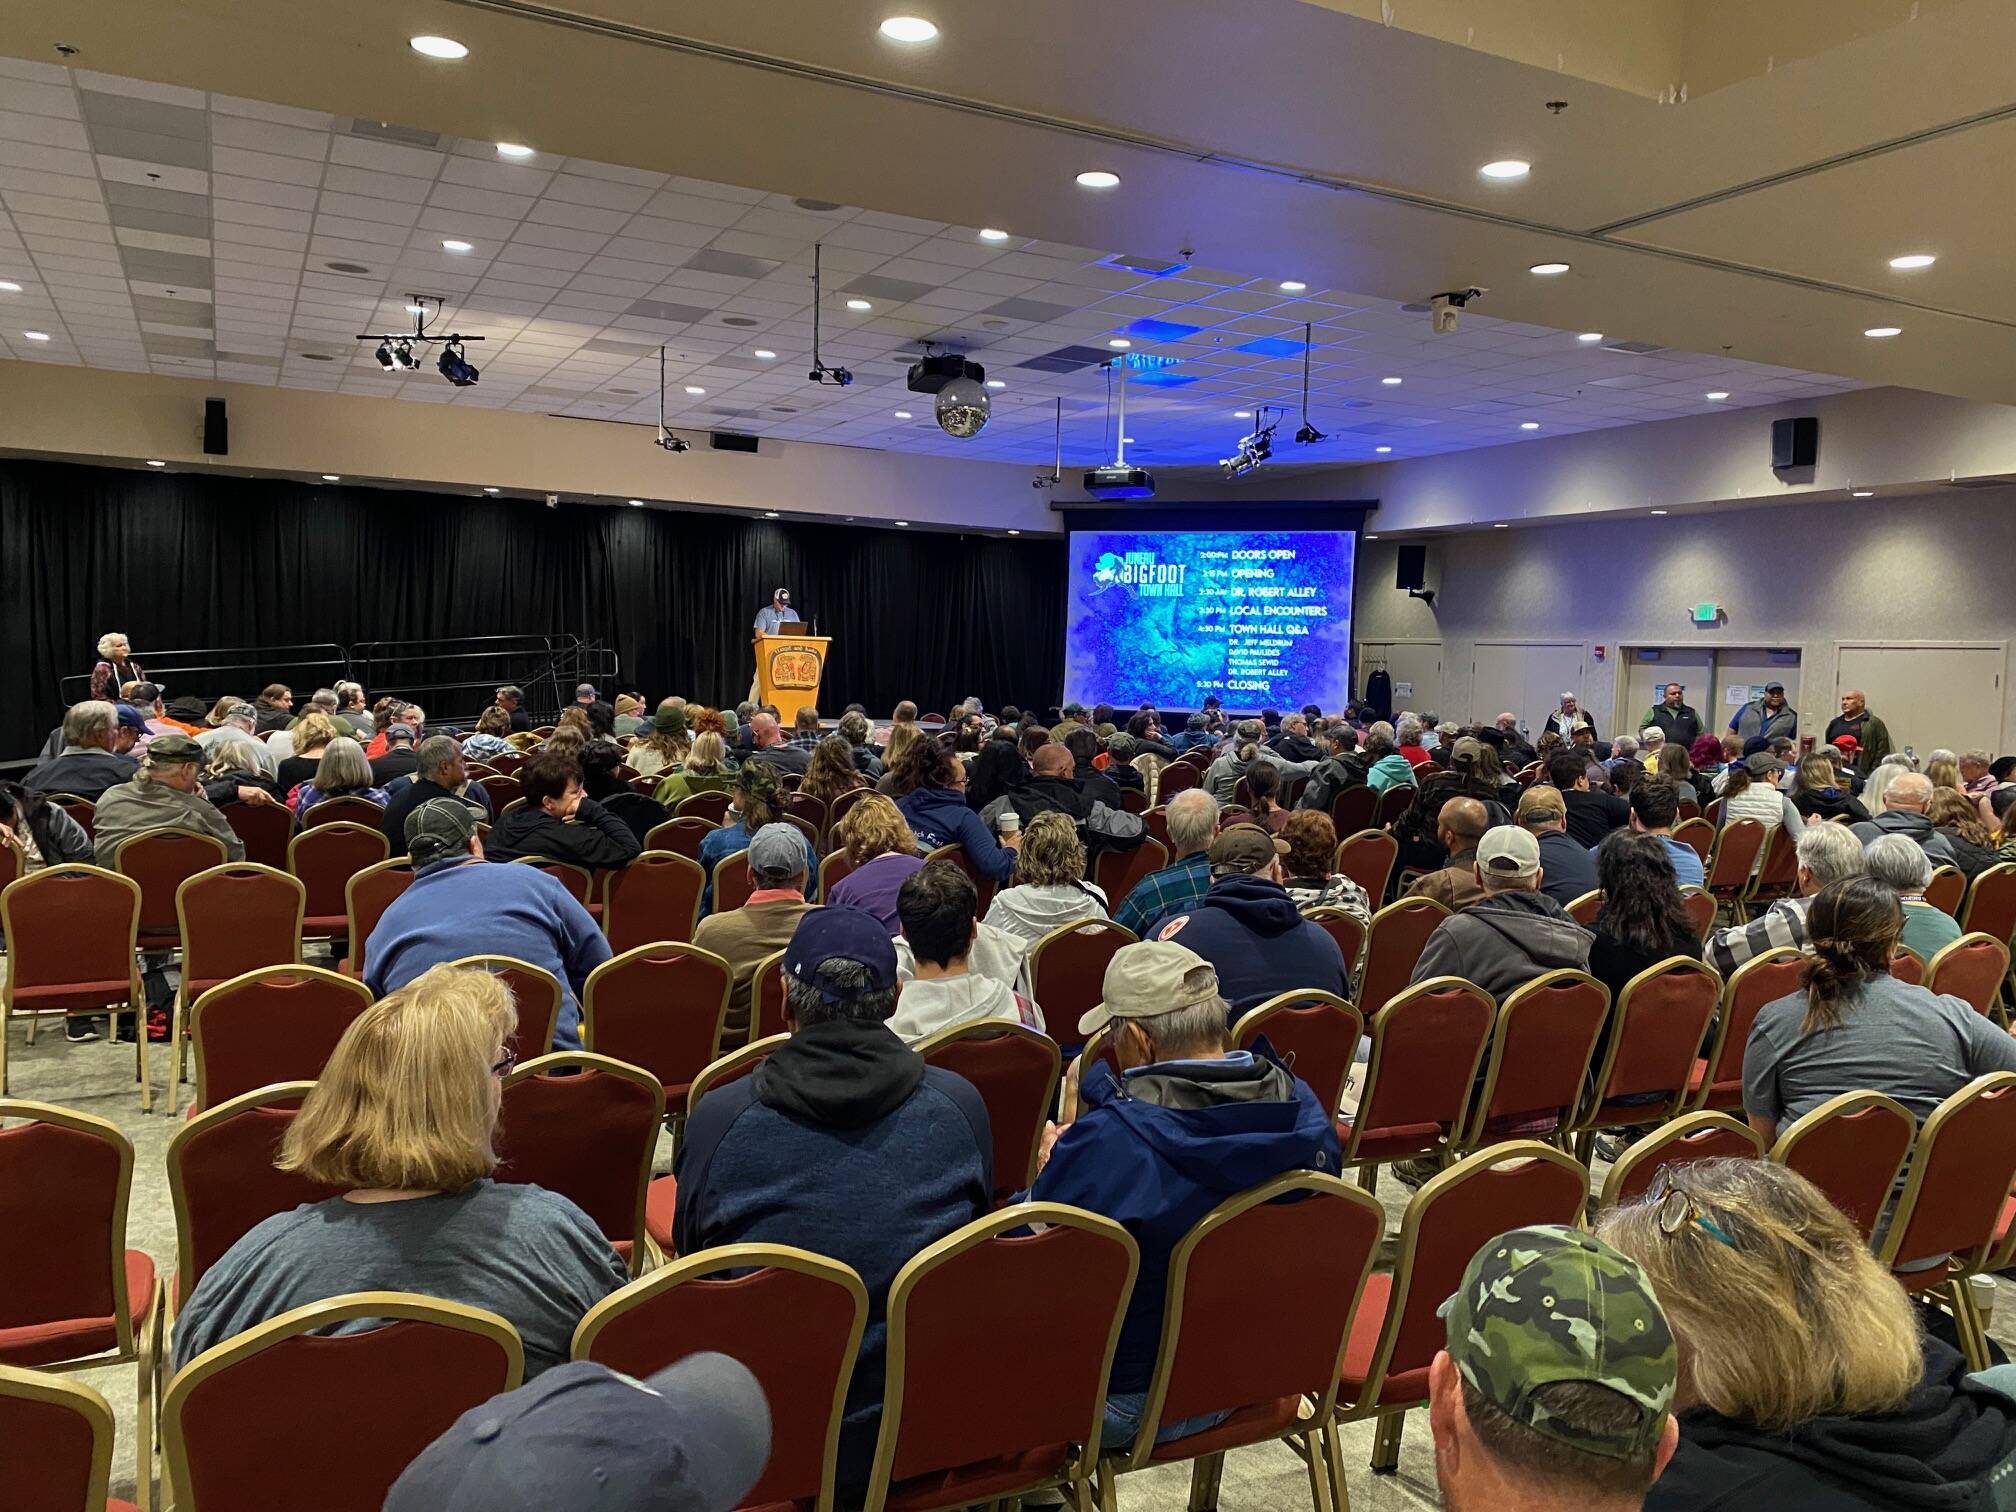 Hundreds of people attend the Juneau Bigfoot Town Hall on Friday at Elizabeth Peratrovich Hall. (Meredith Jordan / Juneau Empire)